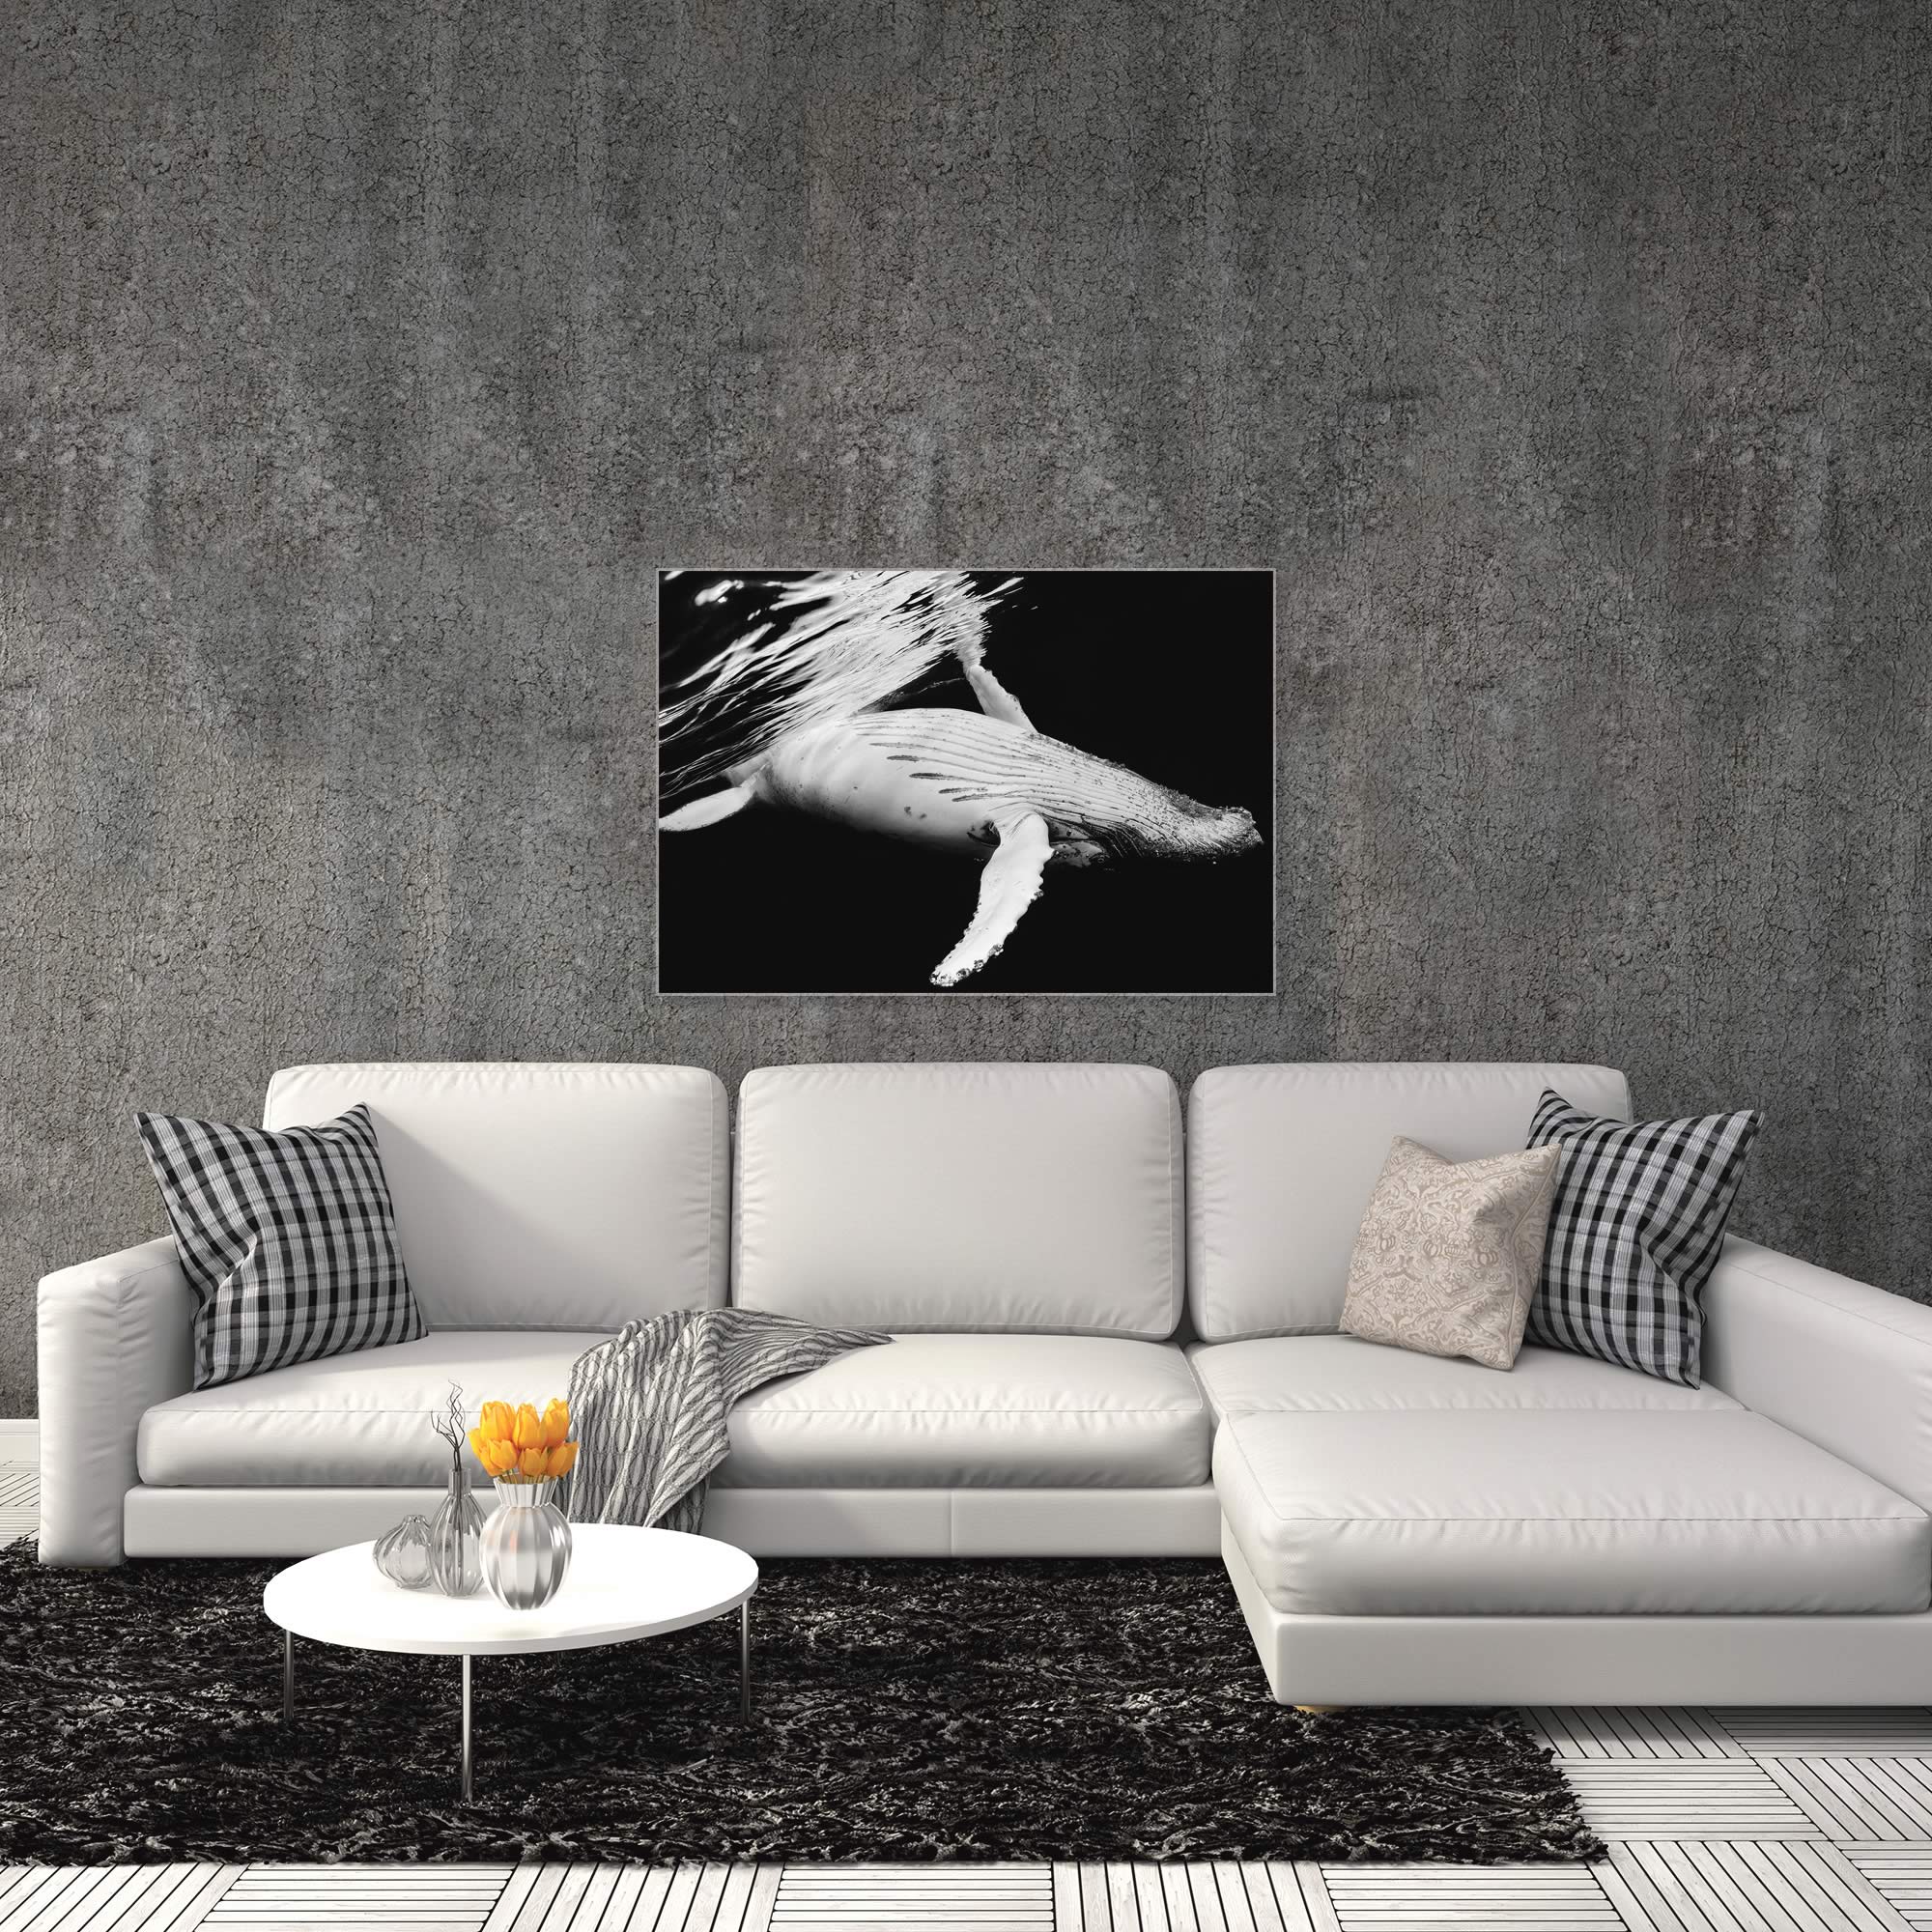 Black and White Whale by Barathieu Gabriel - Contemporary Whale Art on Metal or Acrylic - Alternate View 3